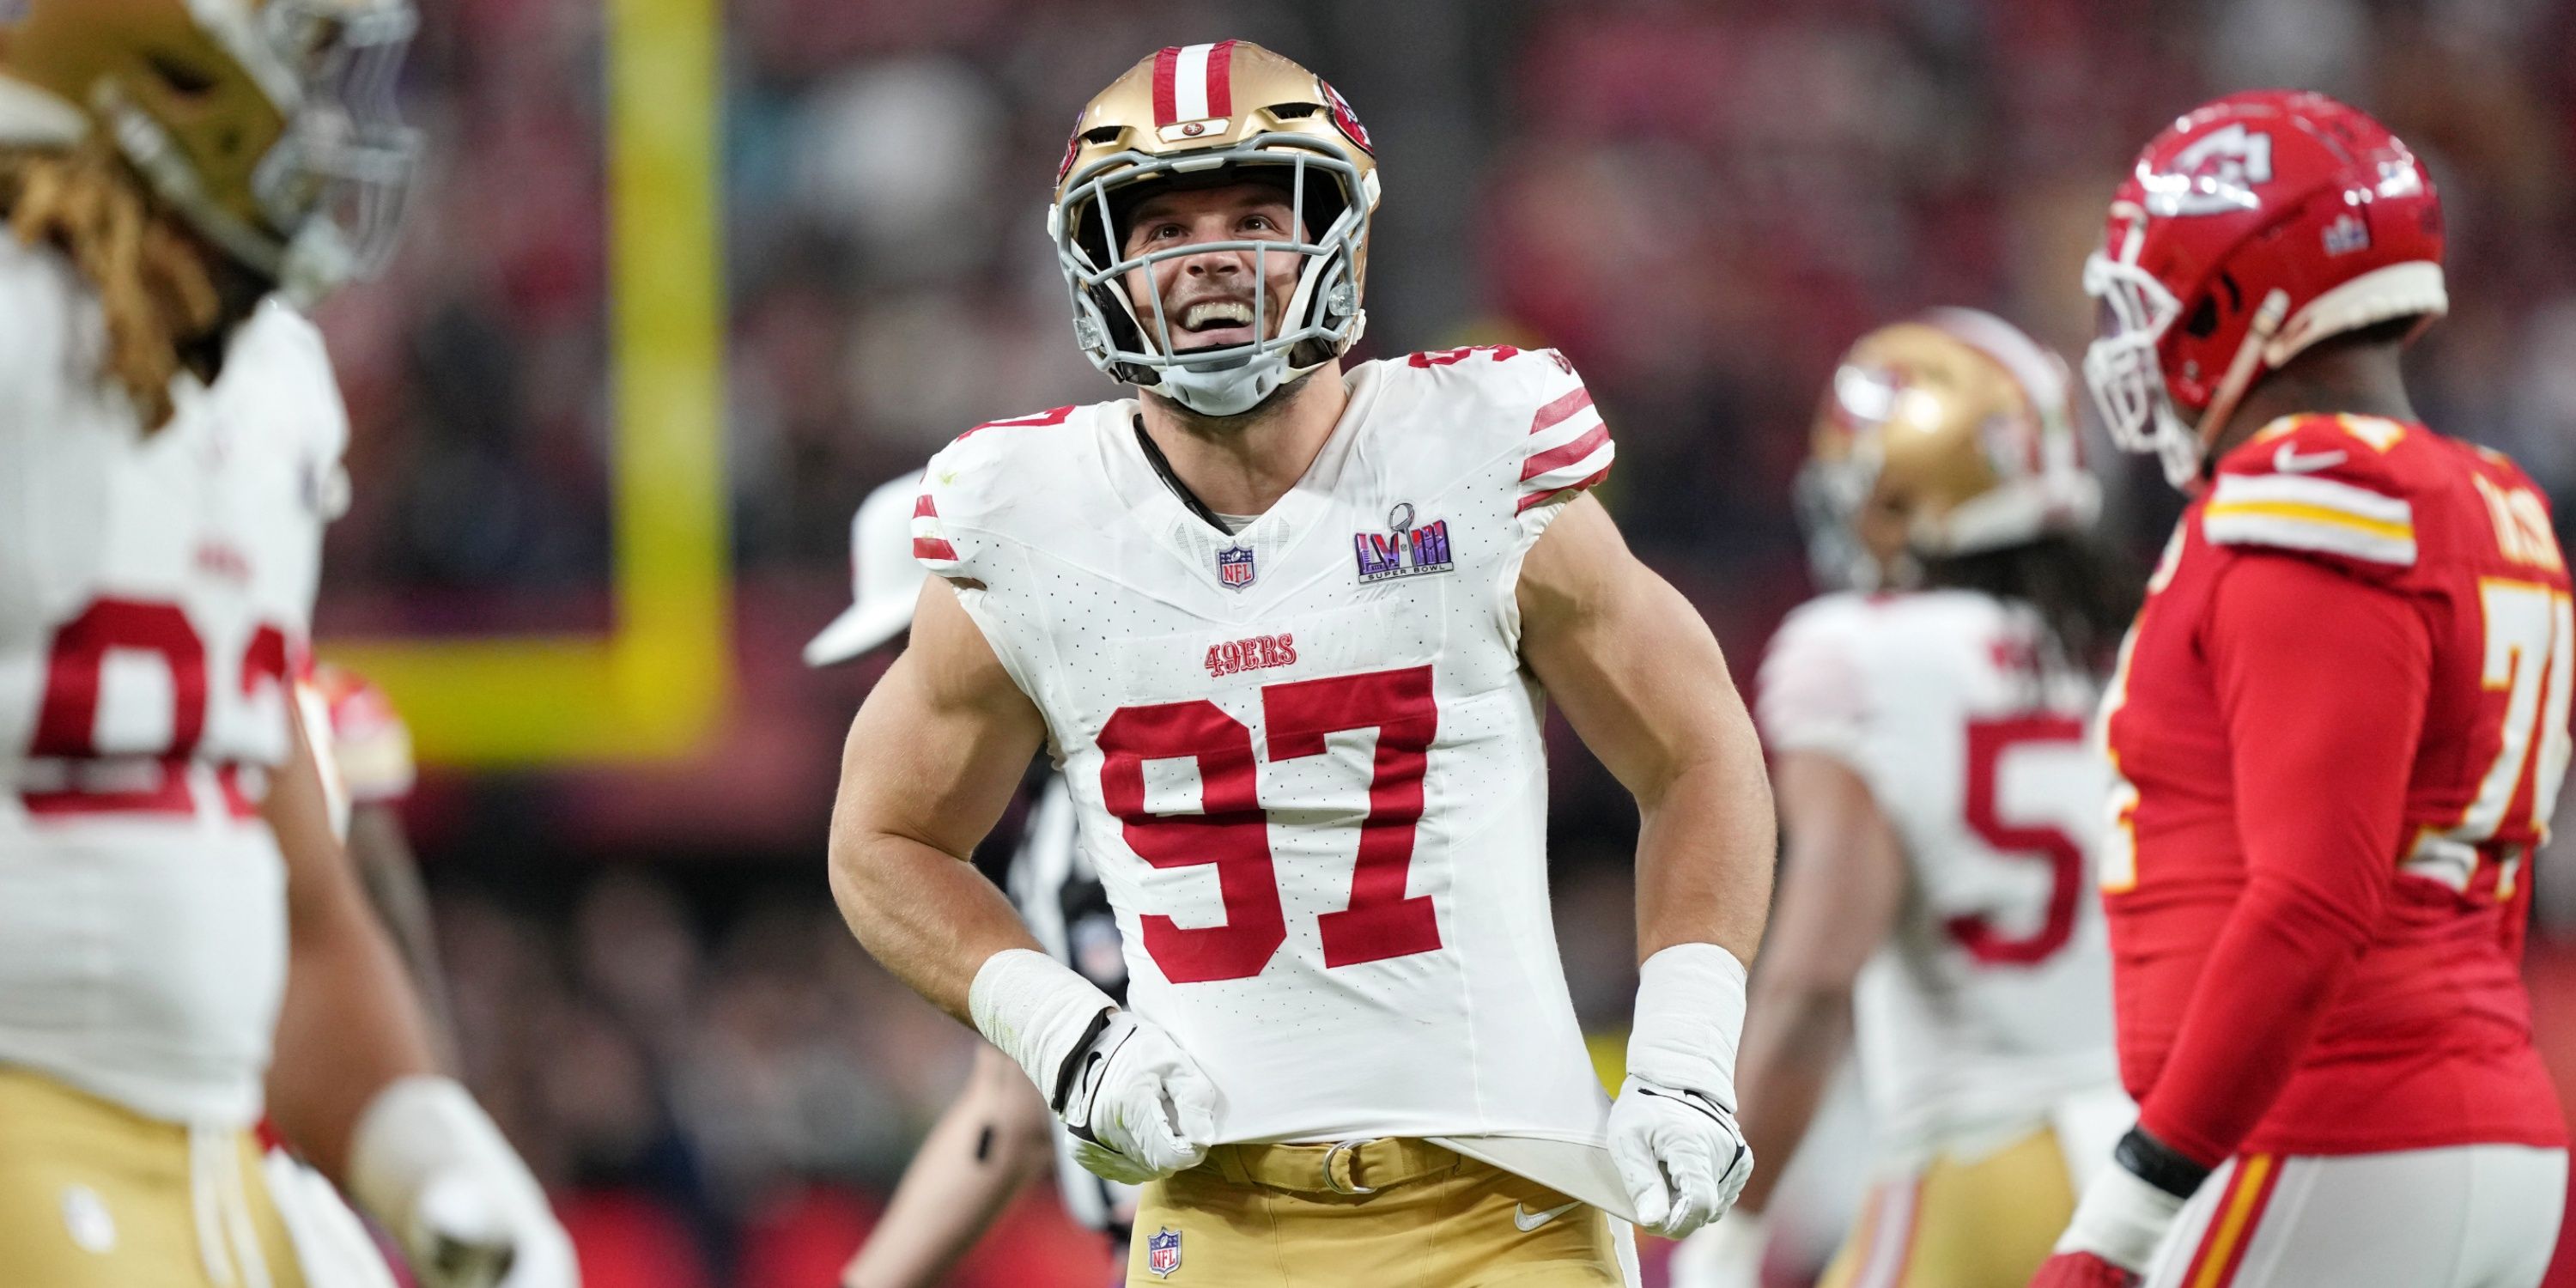 49ers star Nick Bosa after a sack in the Super Bowl